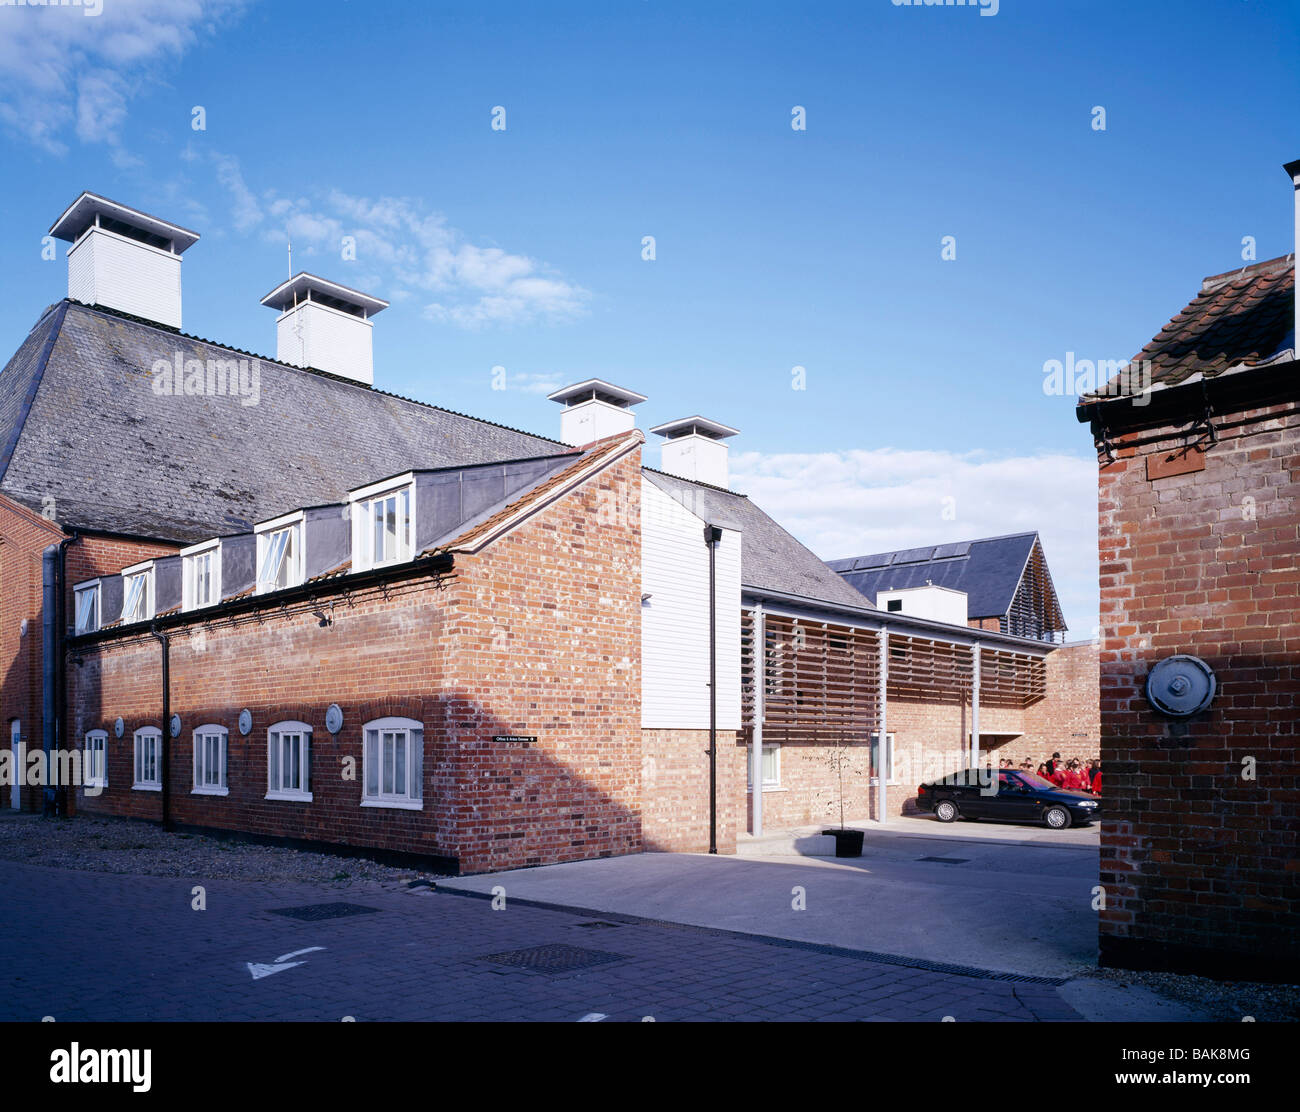 snape maltings concert hall (aldeburgh productions) view of courtyard Stock Photo